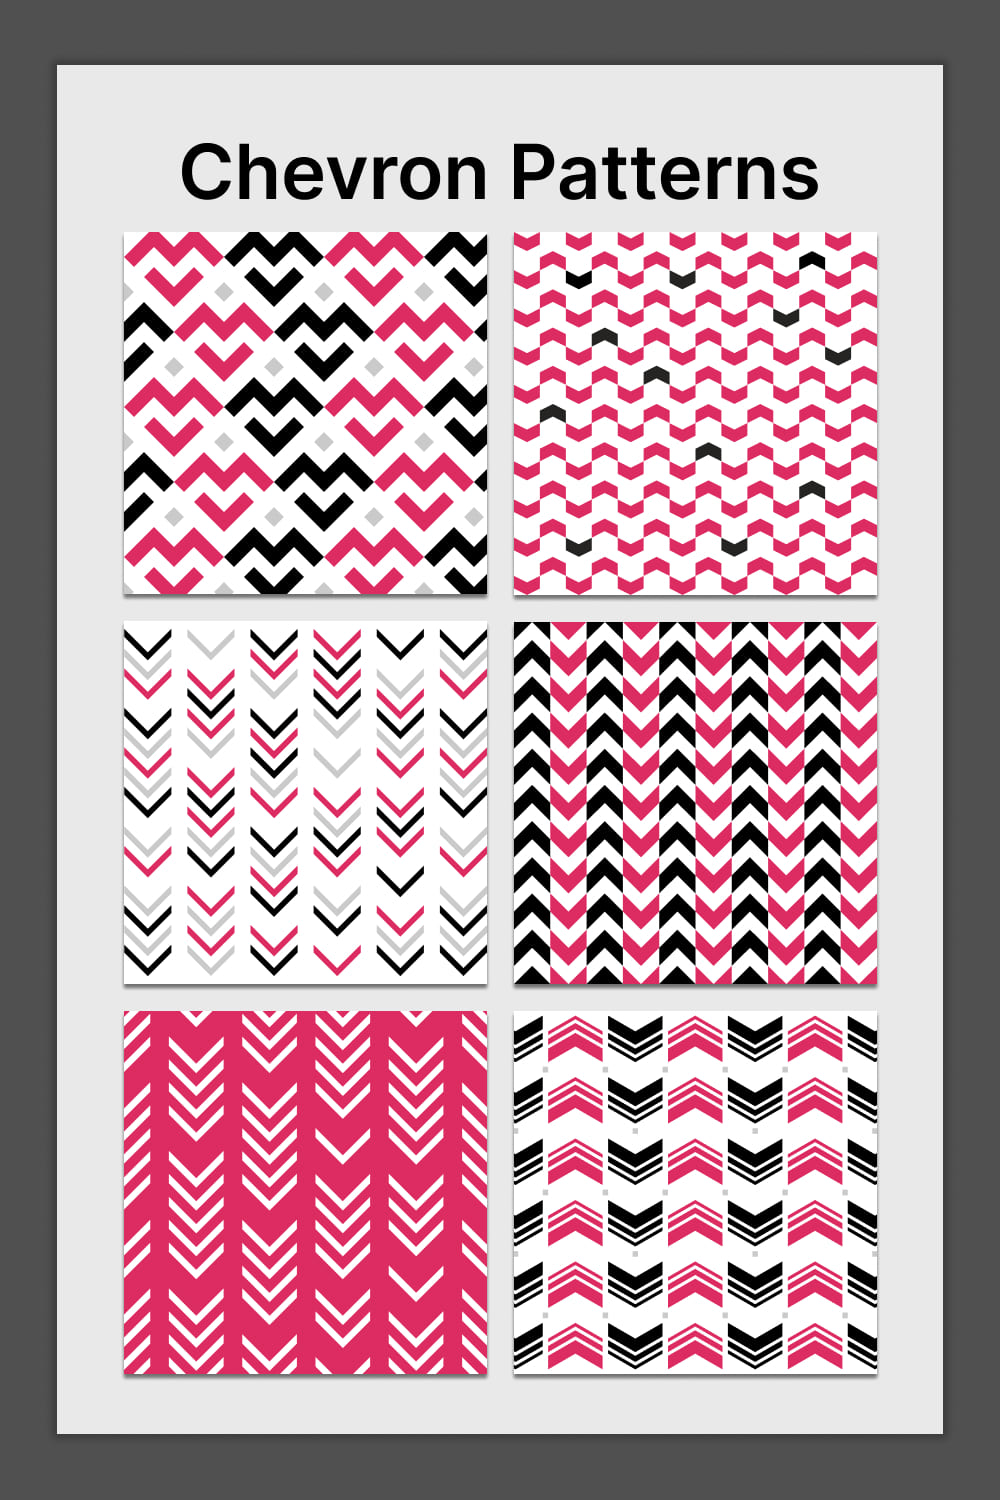 Bright geometric patterns in pink.